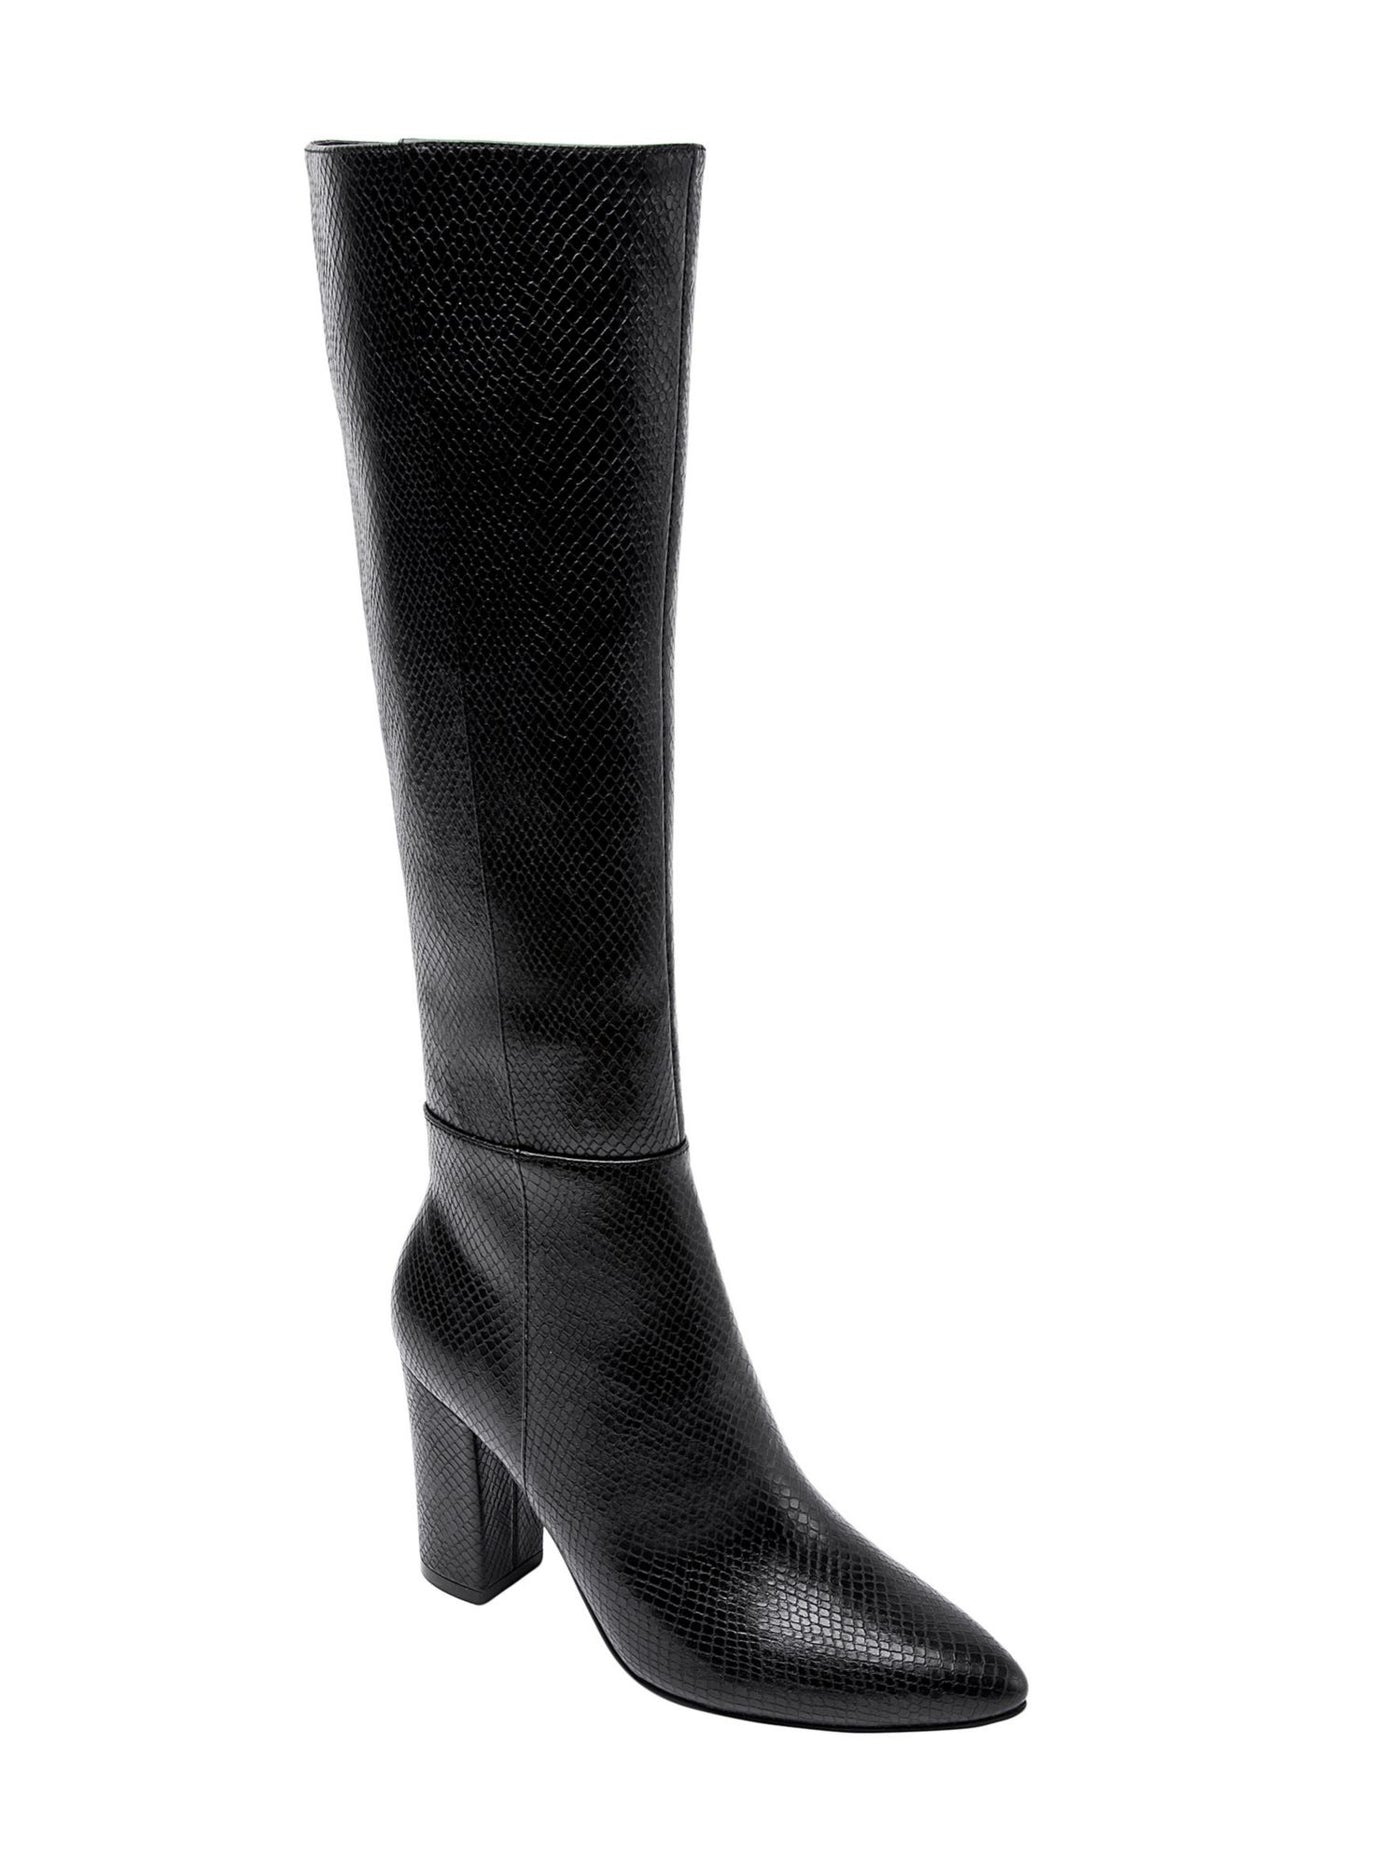 JANE AND THE SHOE Womens Black Mabel Pointy Toe Block Heel Zip-Up Dress Boots 8 M